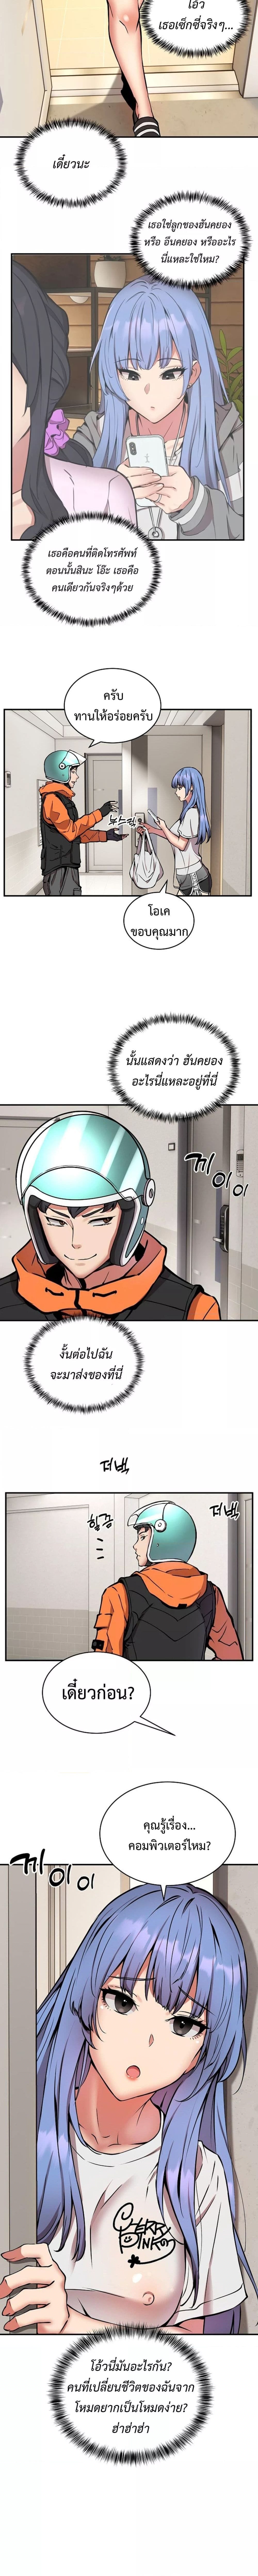 Driver in the New City ตอนที่ 11 ภาพ 12